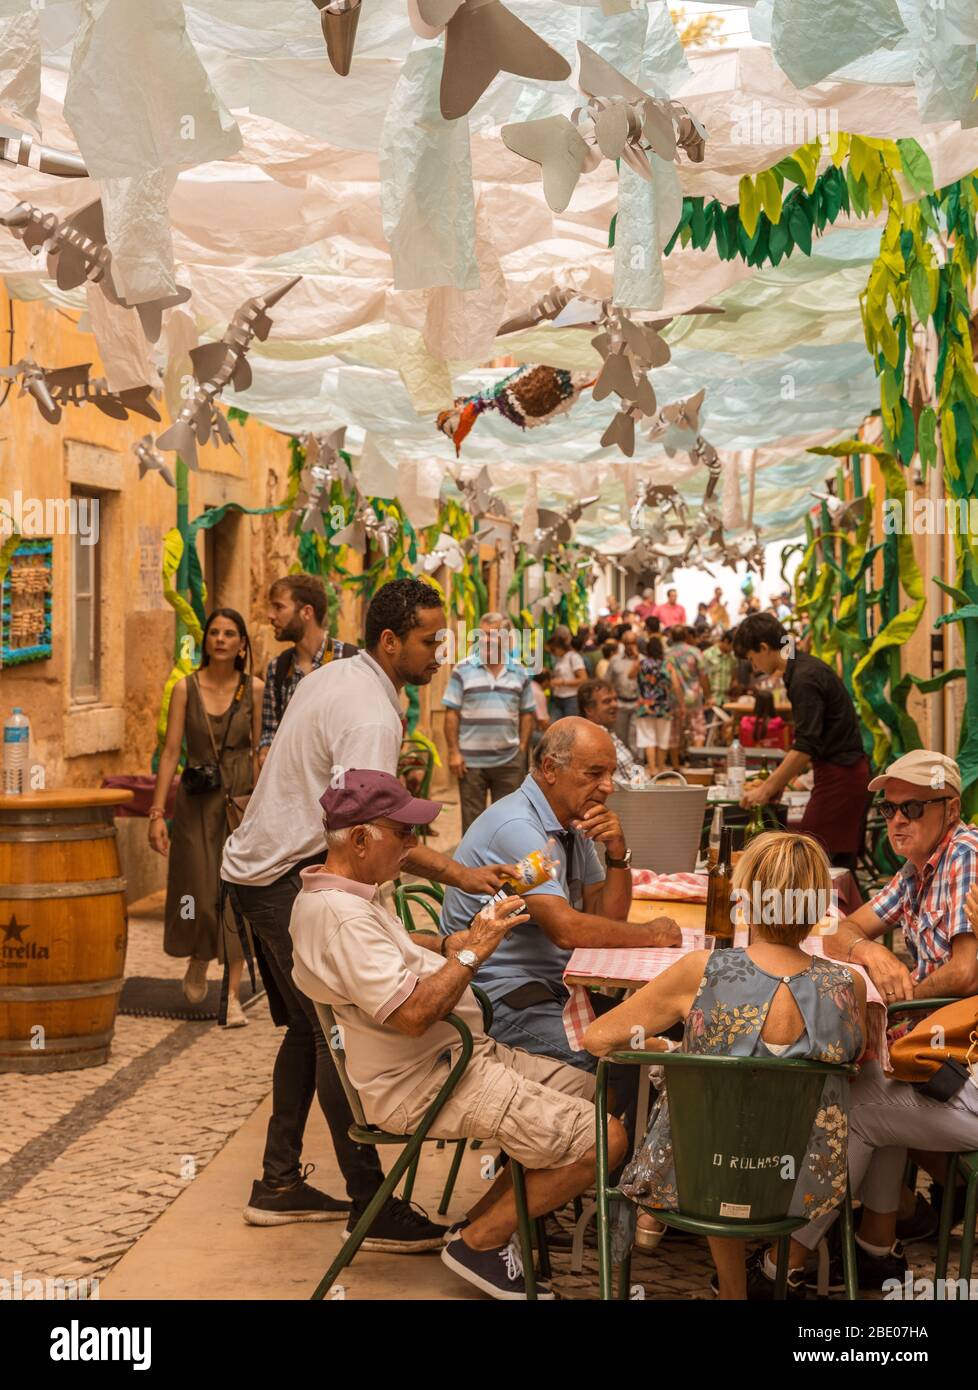 Outside dining in a colourful decorated street during traditional Festa dos Tabuleiros Festival of the Trays Tomar Portugal. Stock Photo